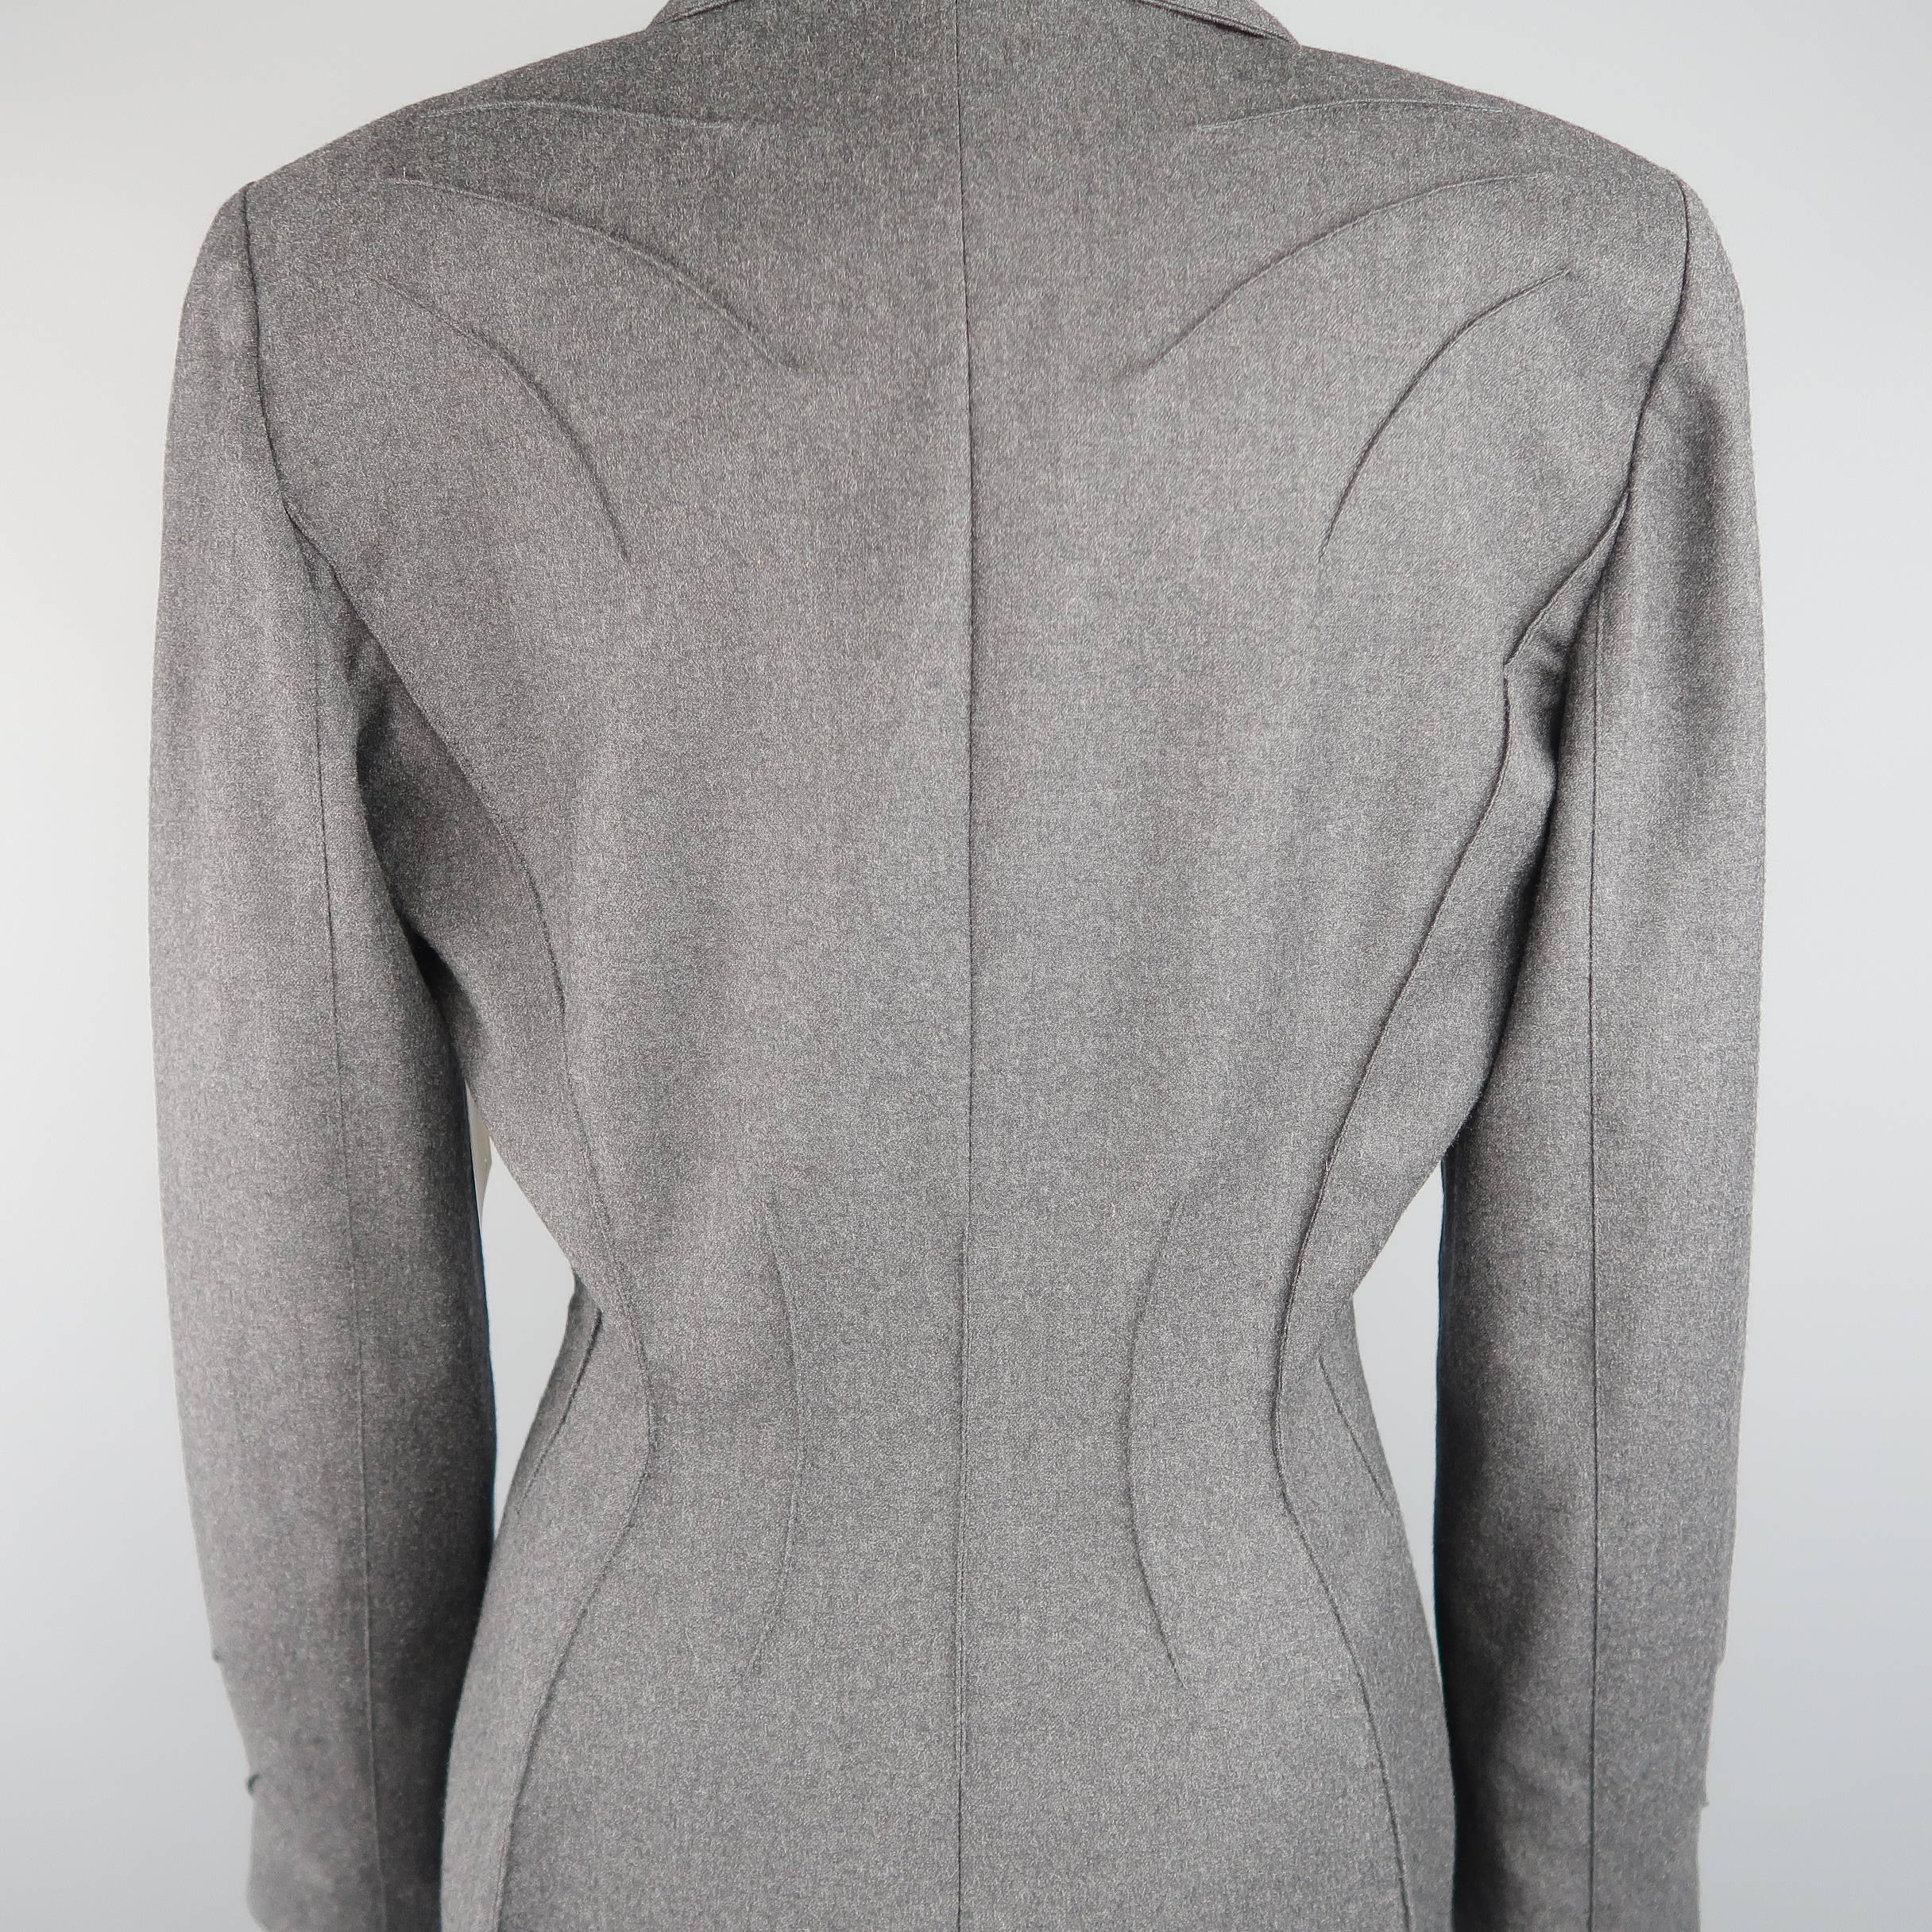 Thierry Mugler Grey Wool Piping Detailed Skirt Suit, Size 10 2